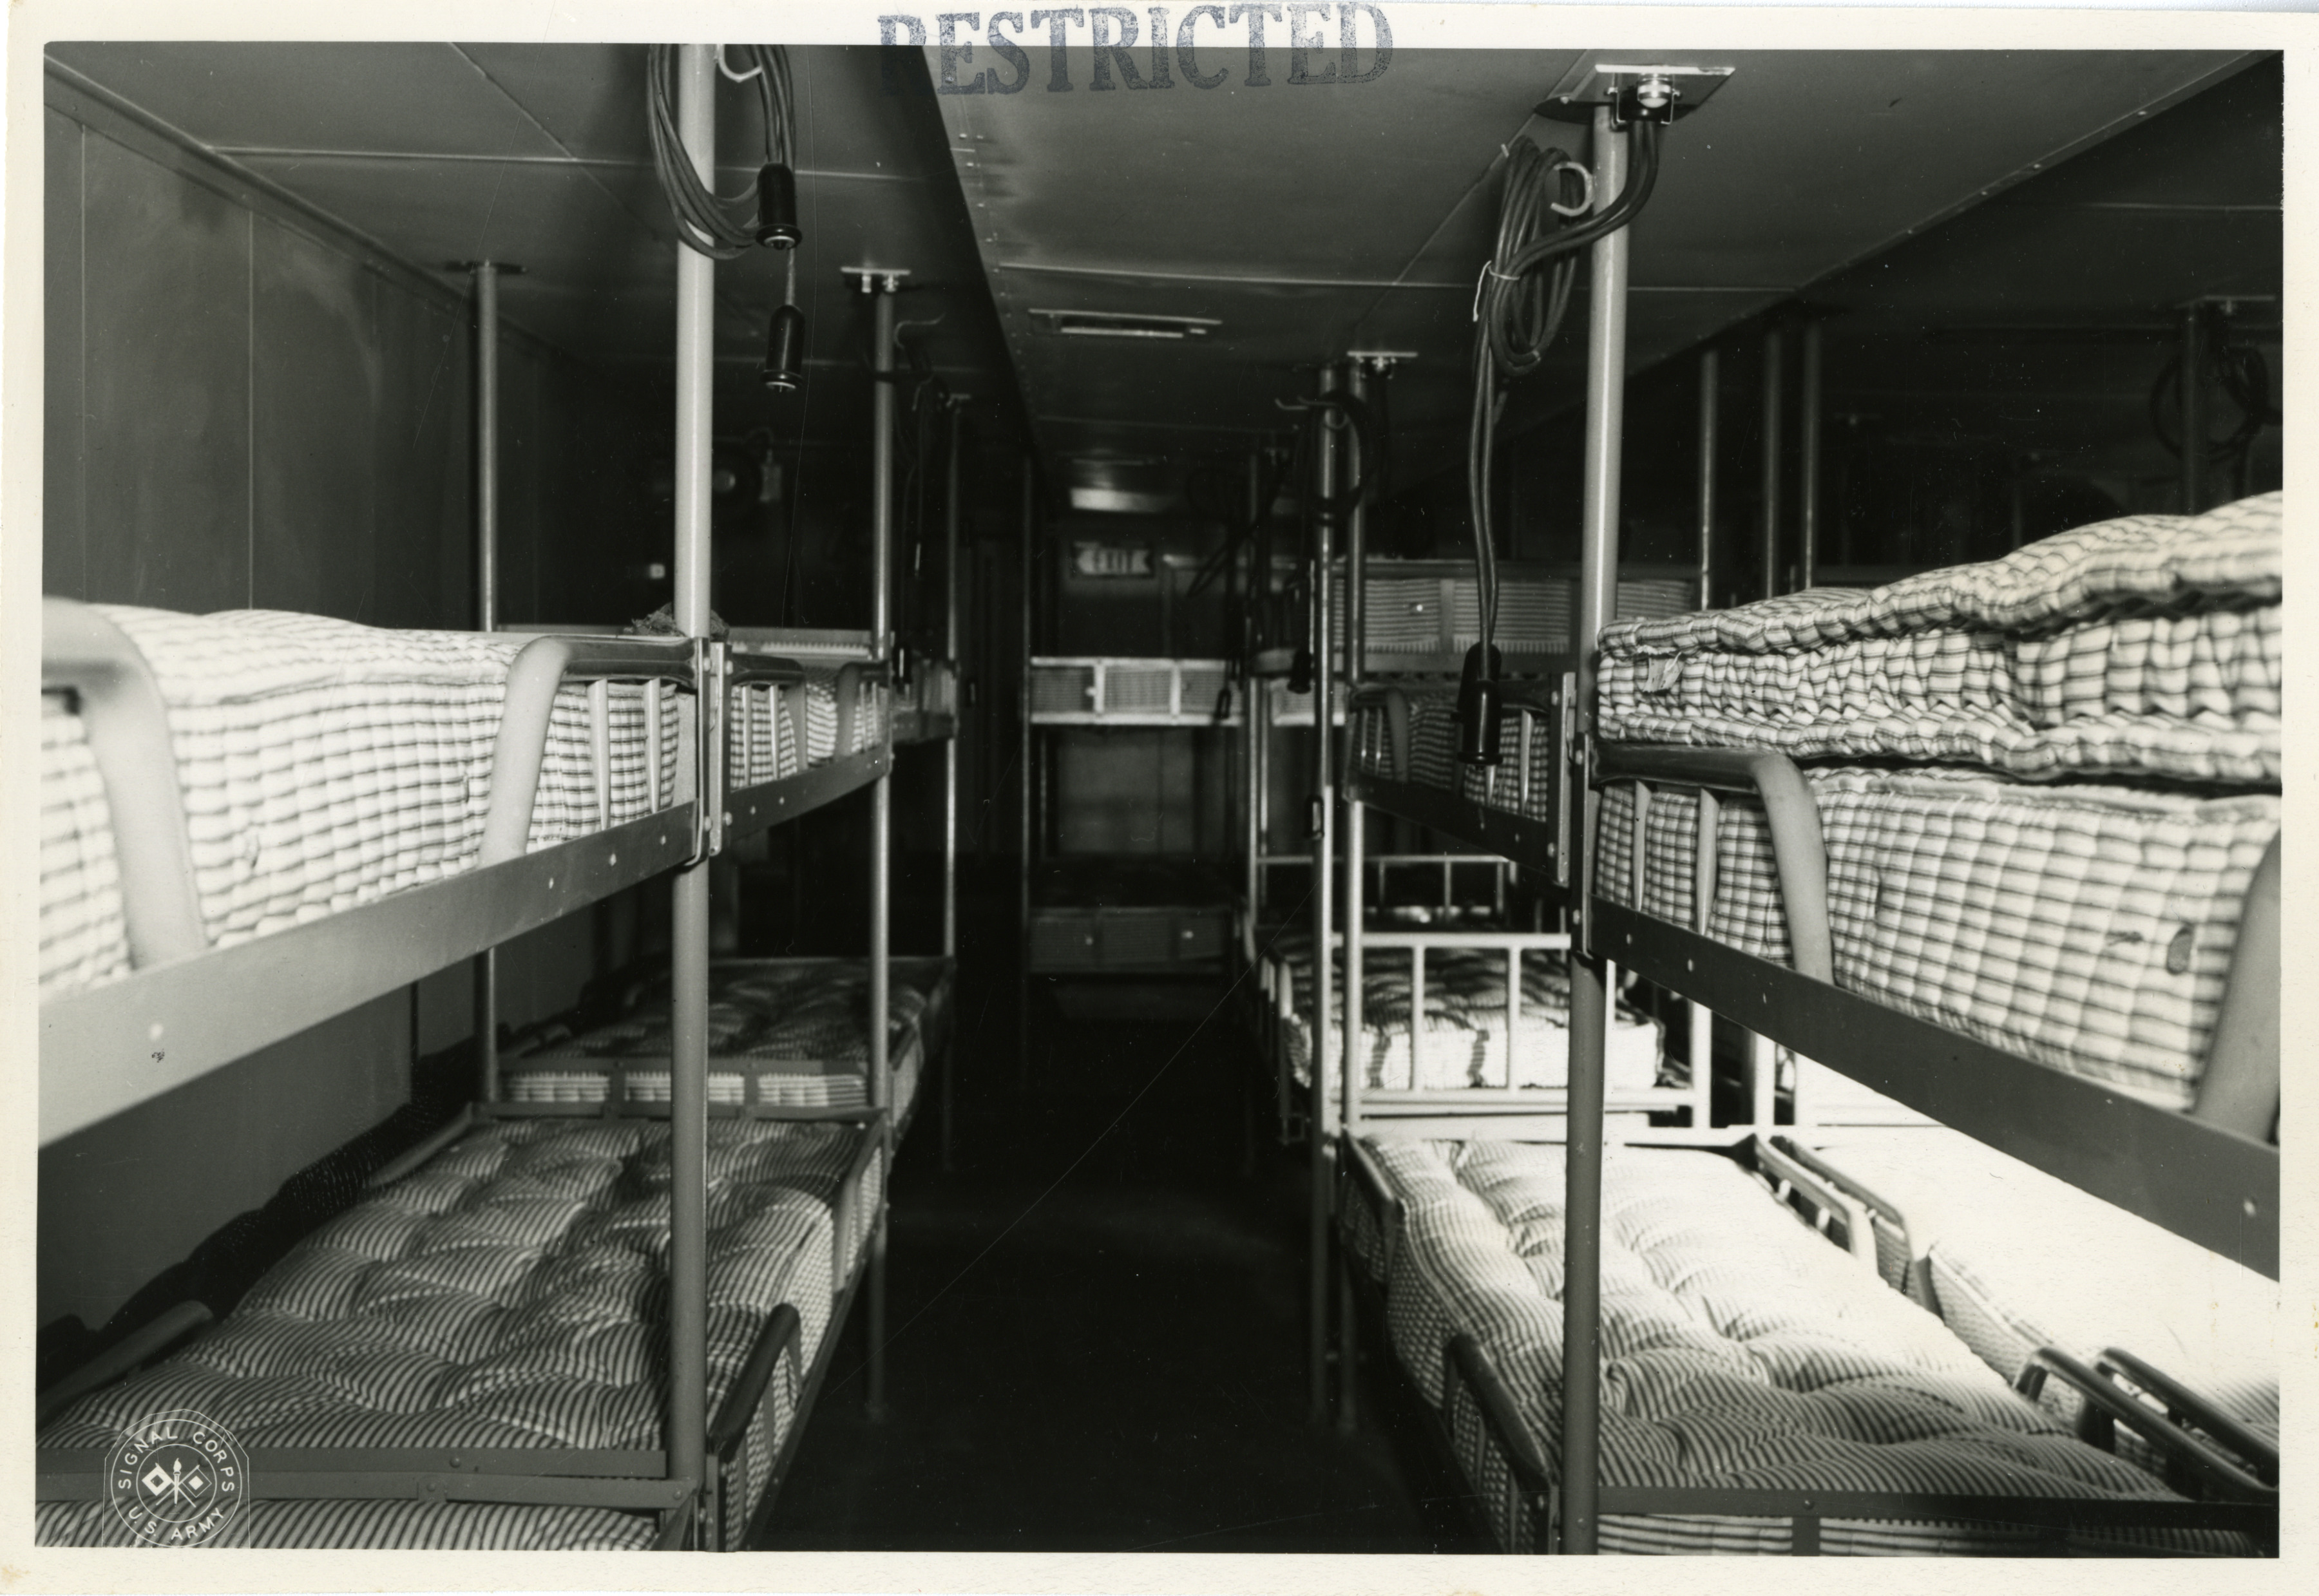 Crew quarters aboard a hospital ship in Jacksonville, Florida on